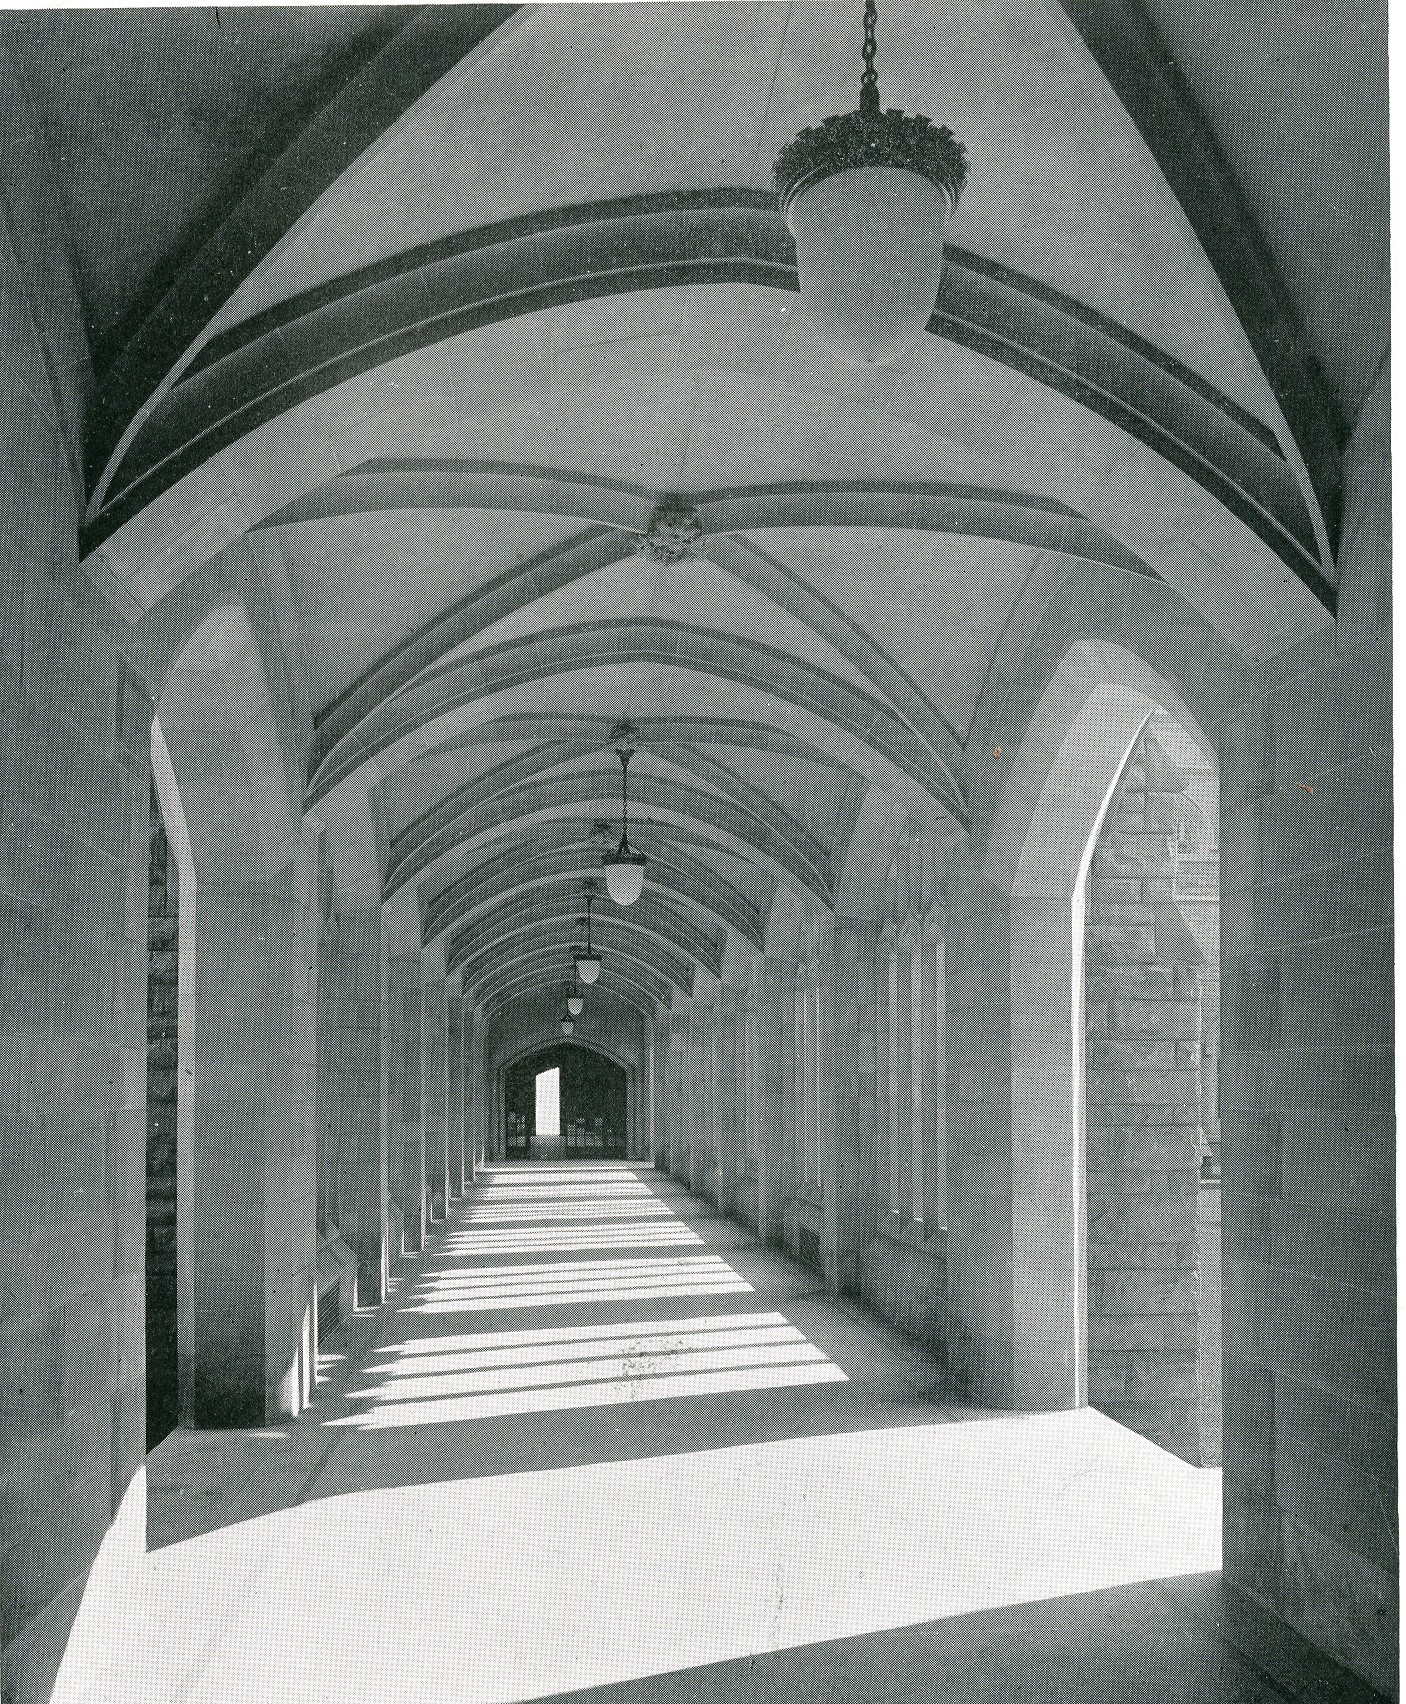 The Cloister, this photo was taken shortly after completion